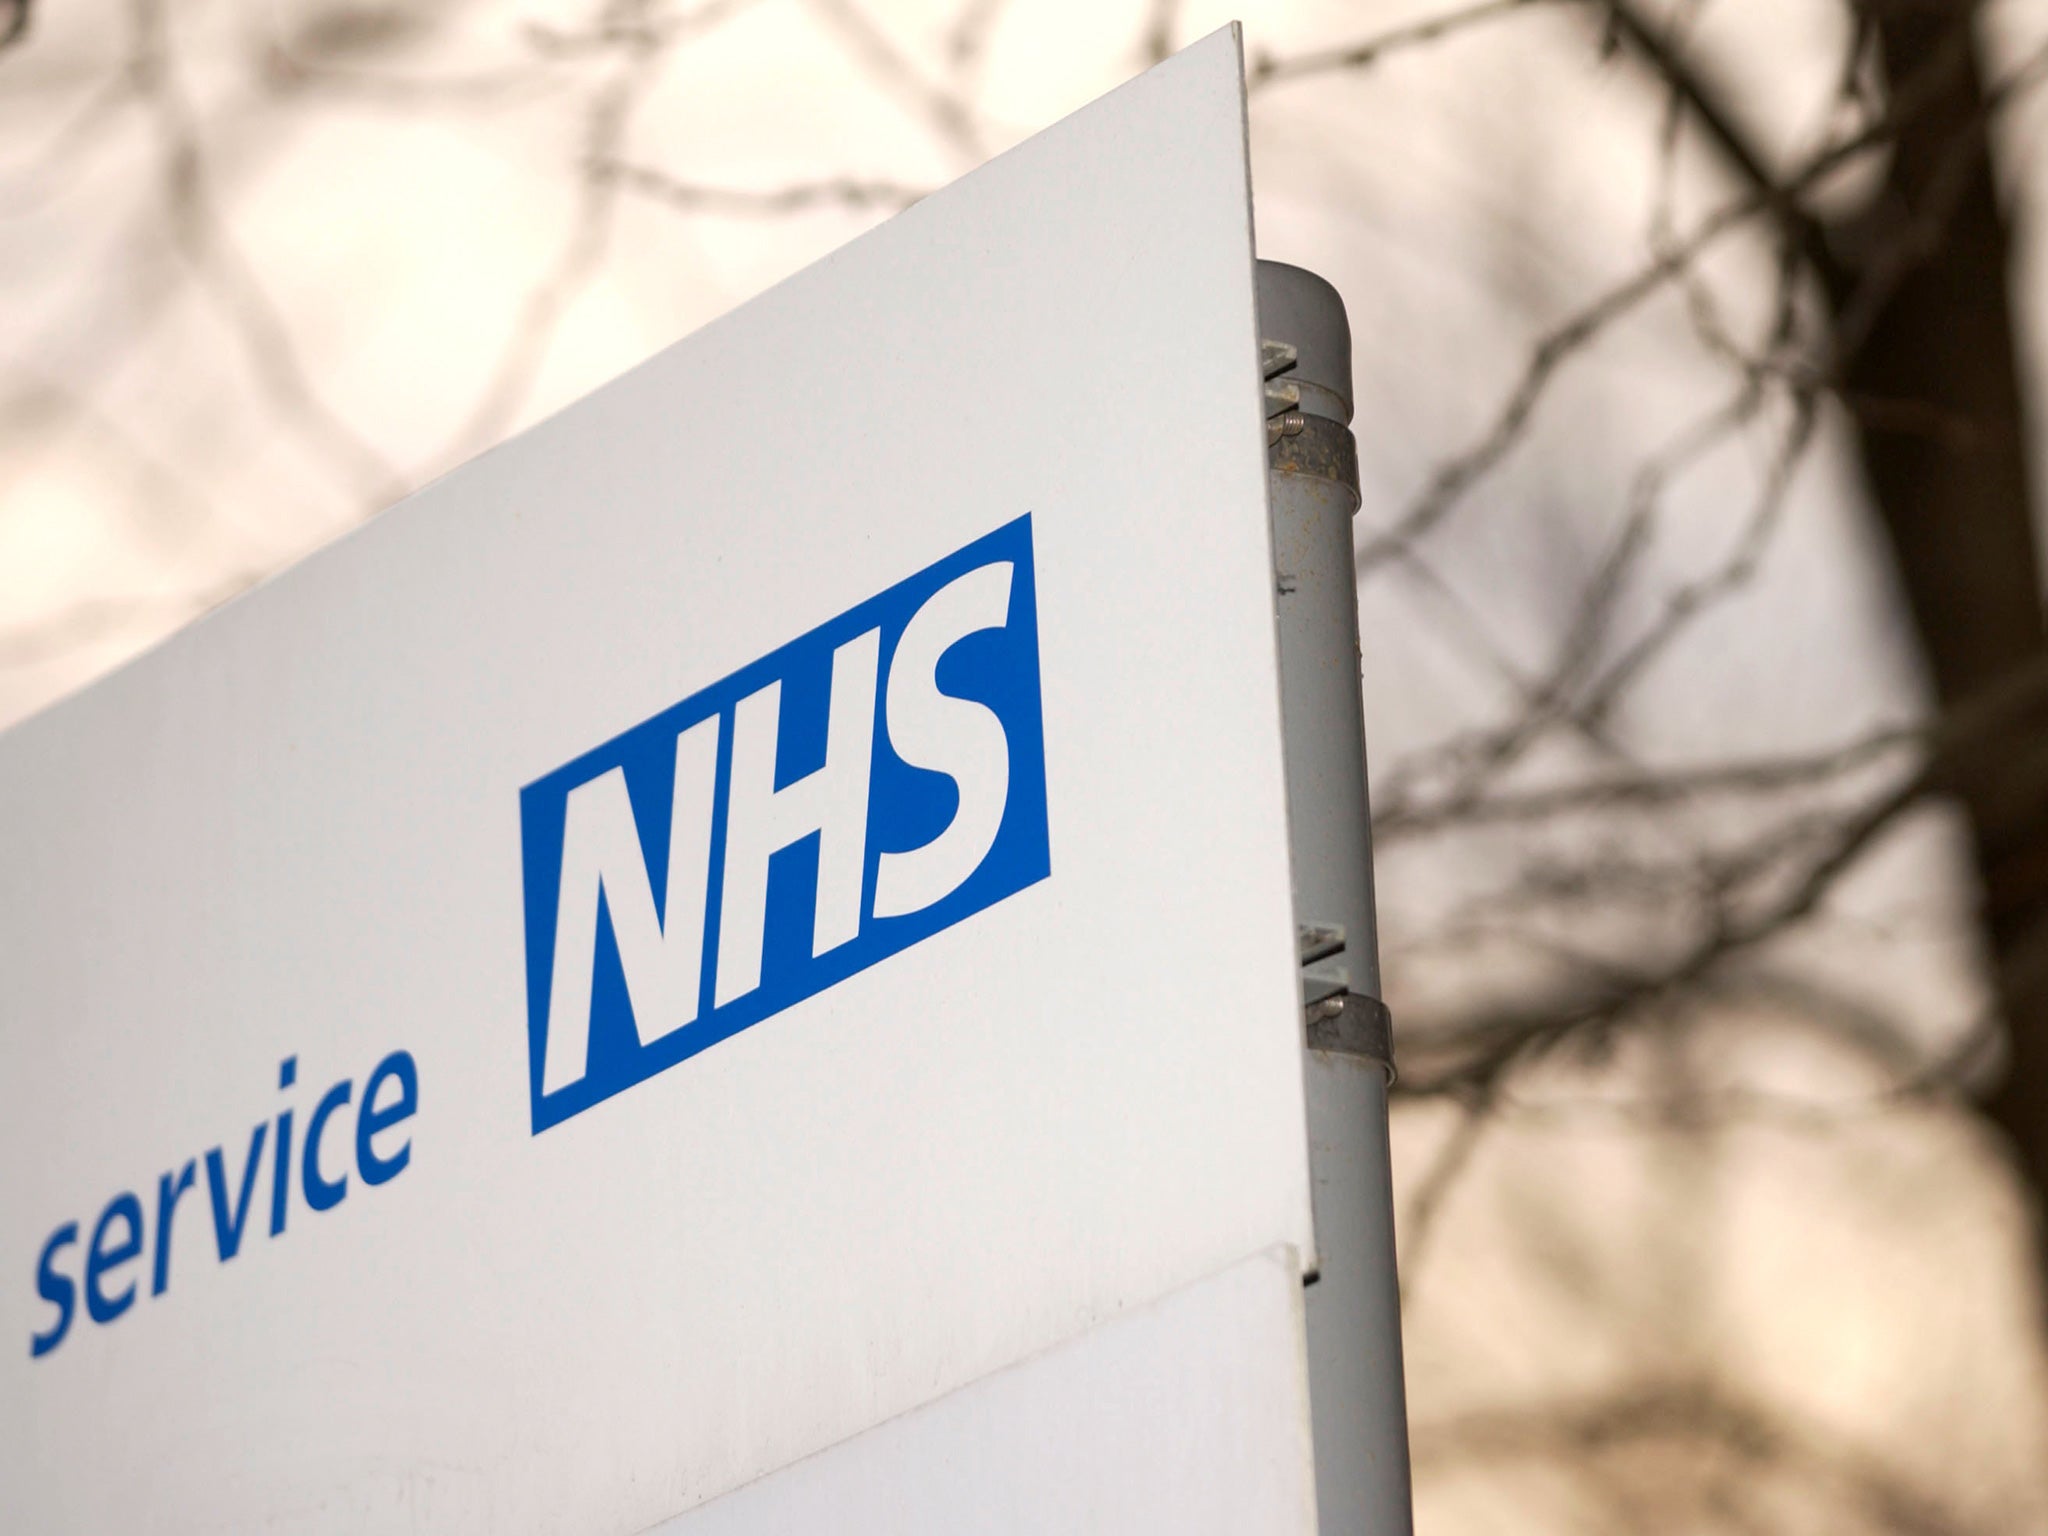 The financial pressures on the NHS are harsh, but it has a duty of care to patients